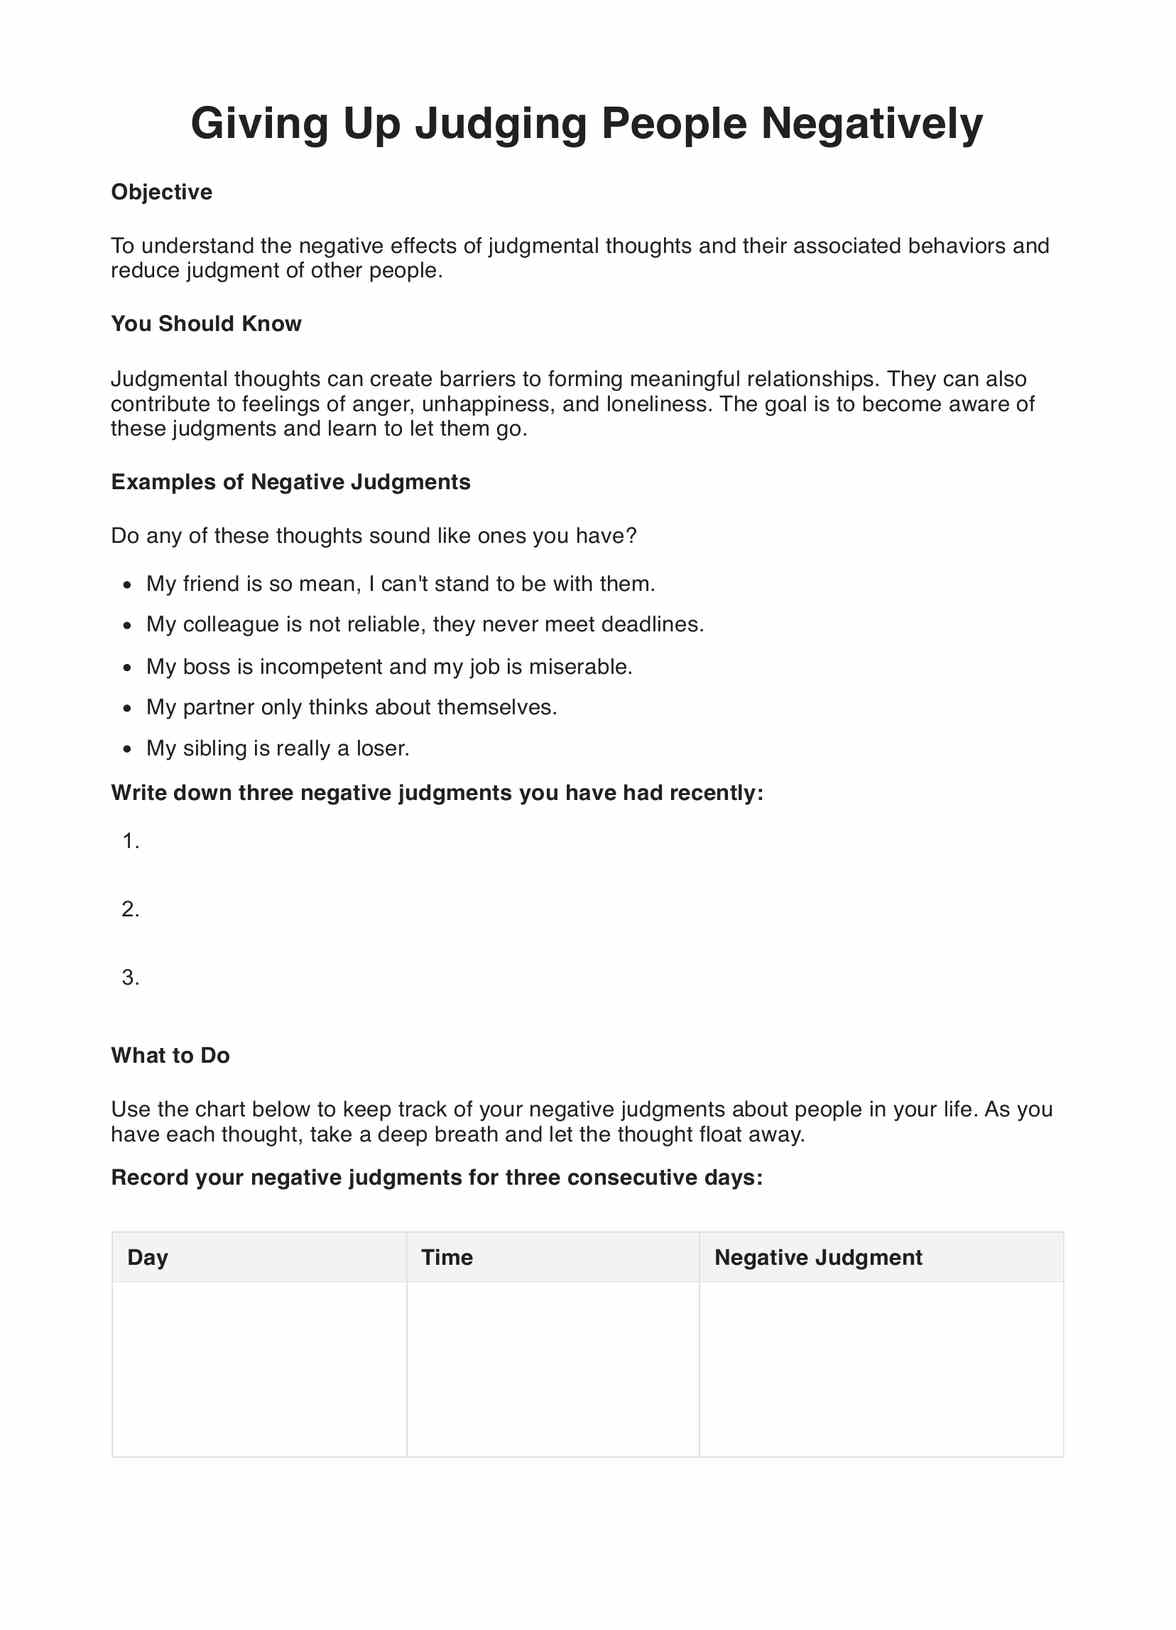 Giving Up Judging People Negatively DBT Worksheet PDF Example